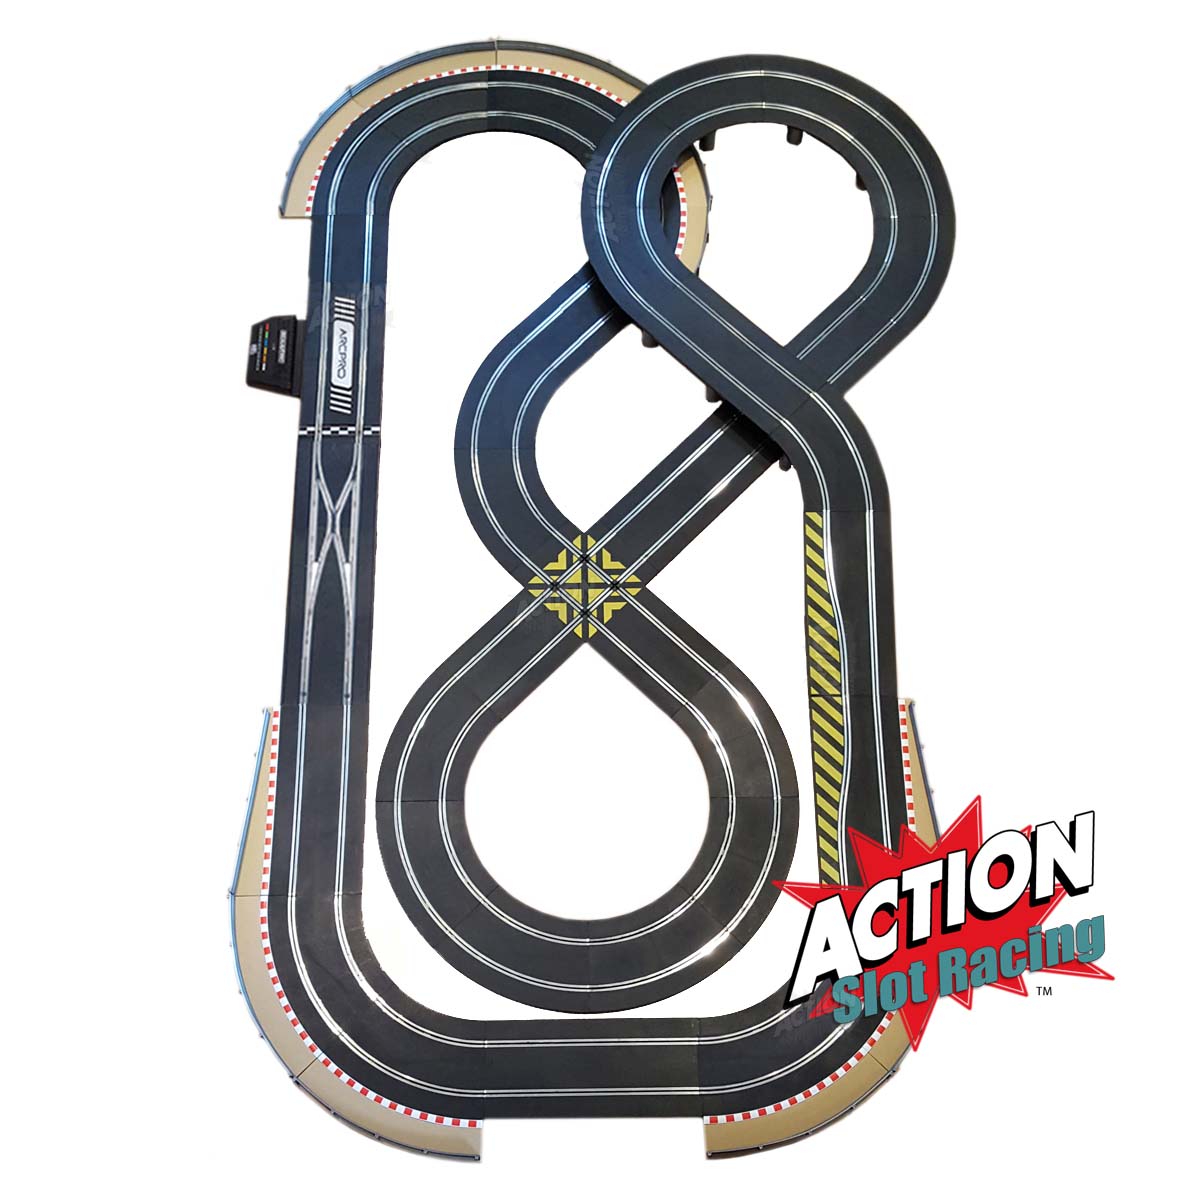 Scalextric Sport 1:32 Track Set - Double Figure-Of-Eight Layout ARC Pro